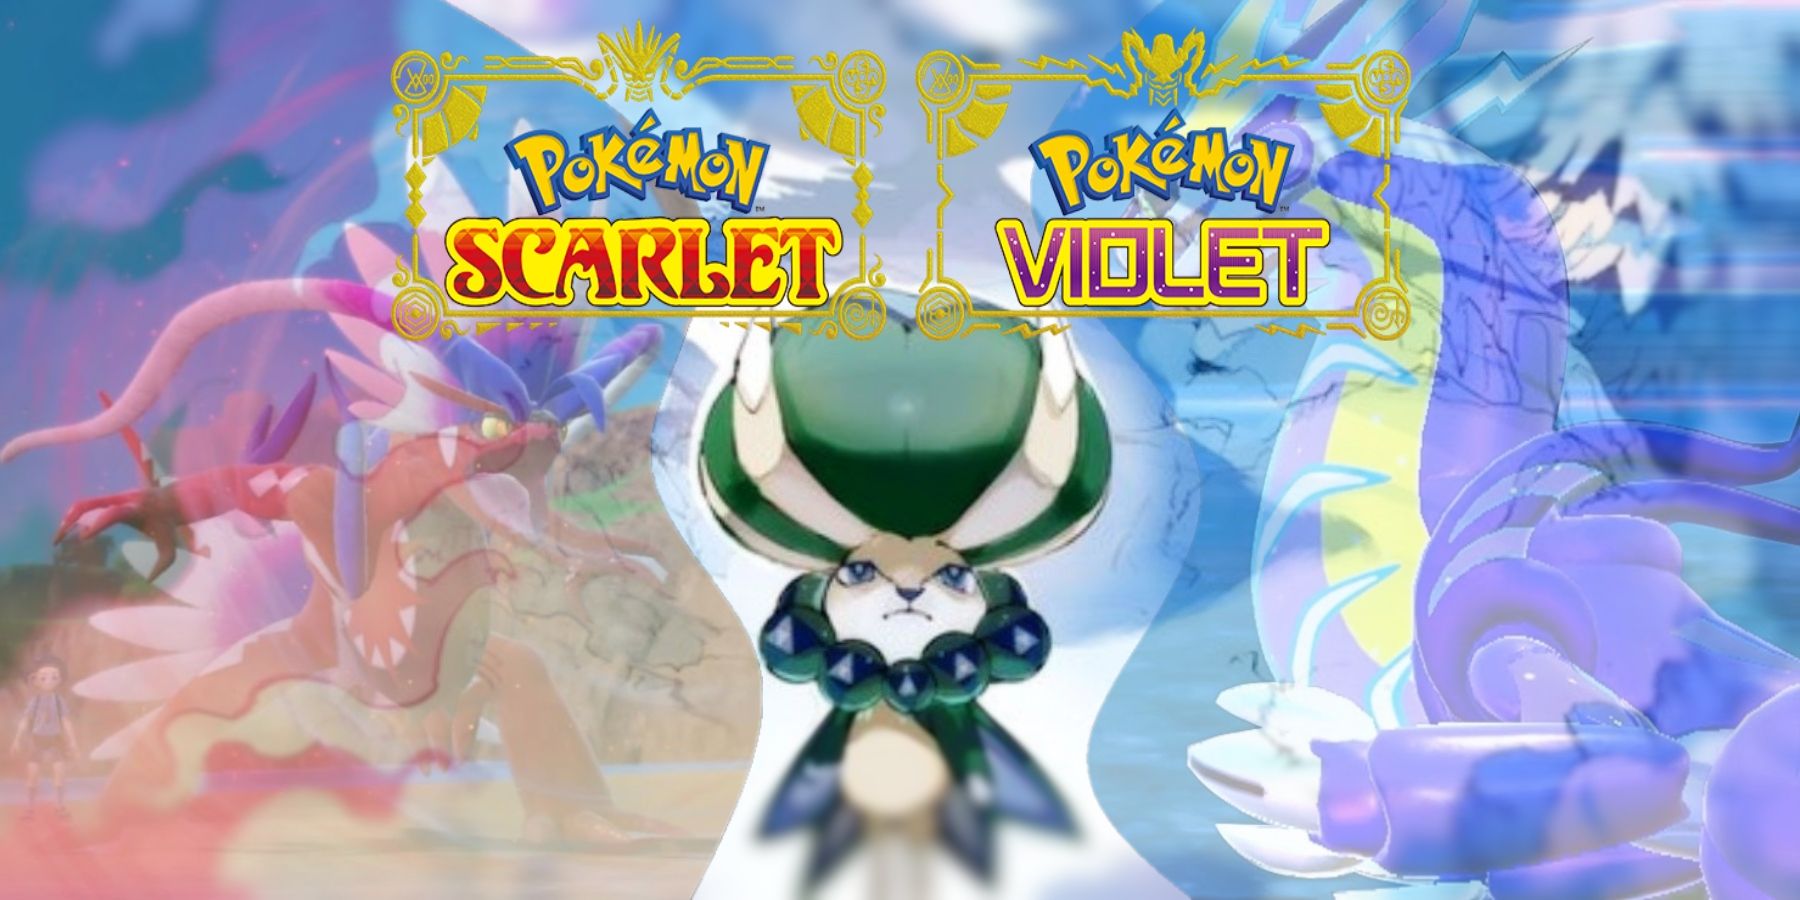 What Pokémon Are in the 'Scarlet' and 'Violet' DLC? Full List